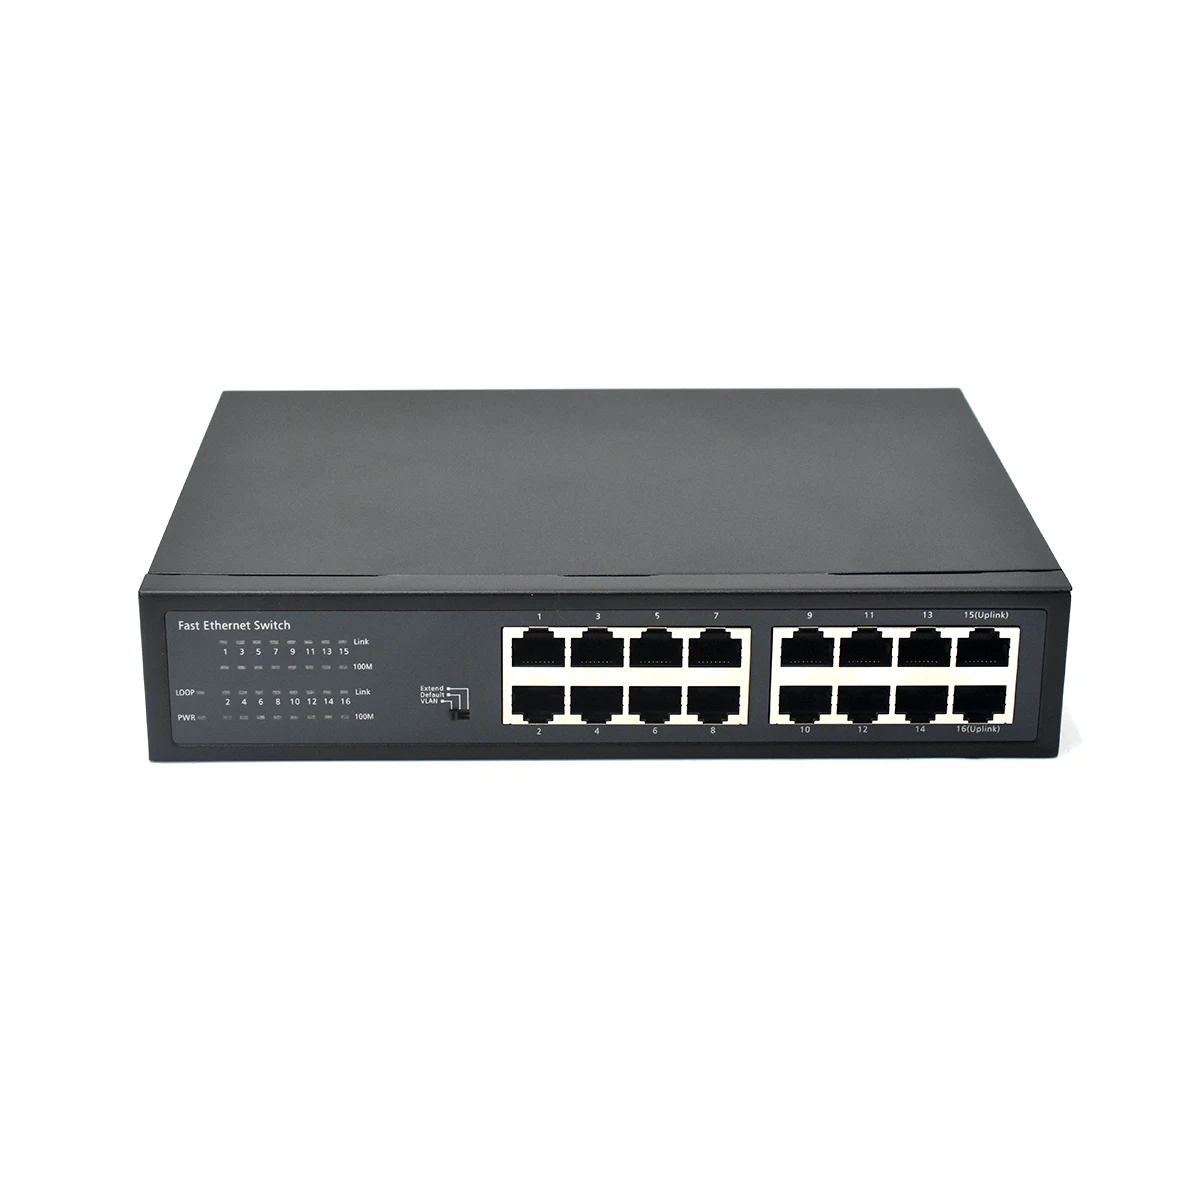 Hotsale Unmanaged Hub network switch 100M trillion 16 Port Ethernet steel shell case Switch with Metal Housing